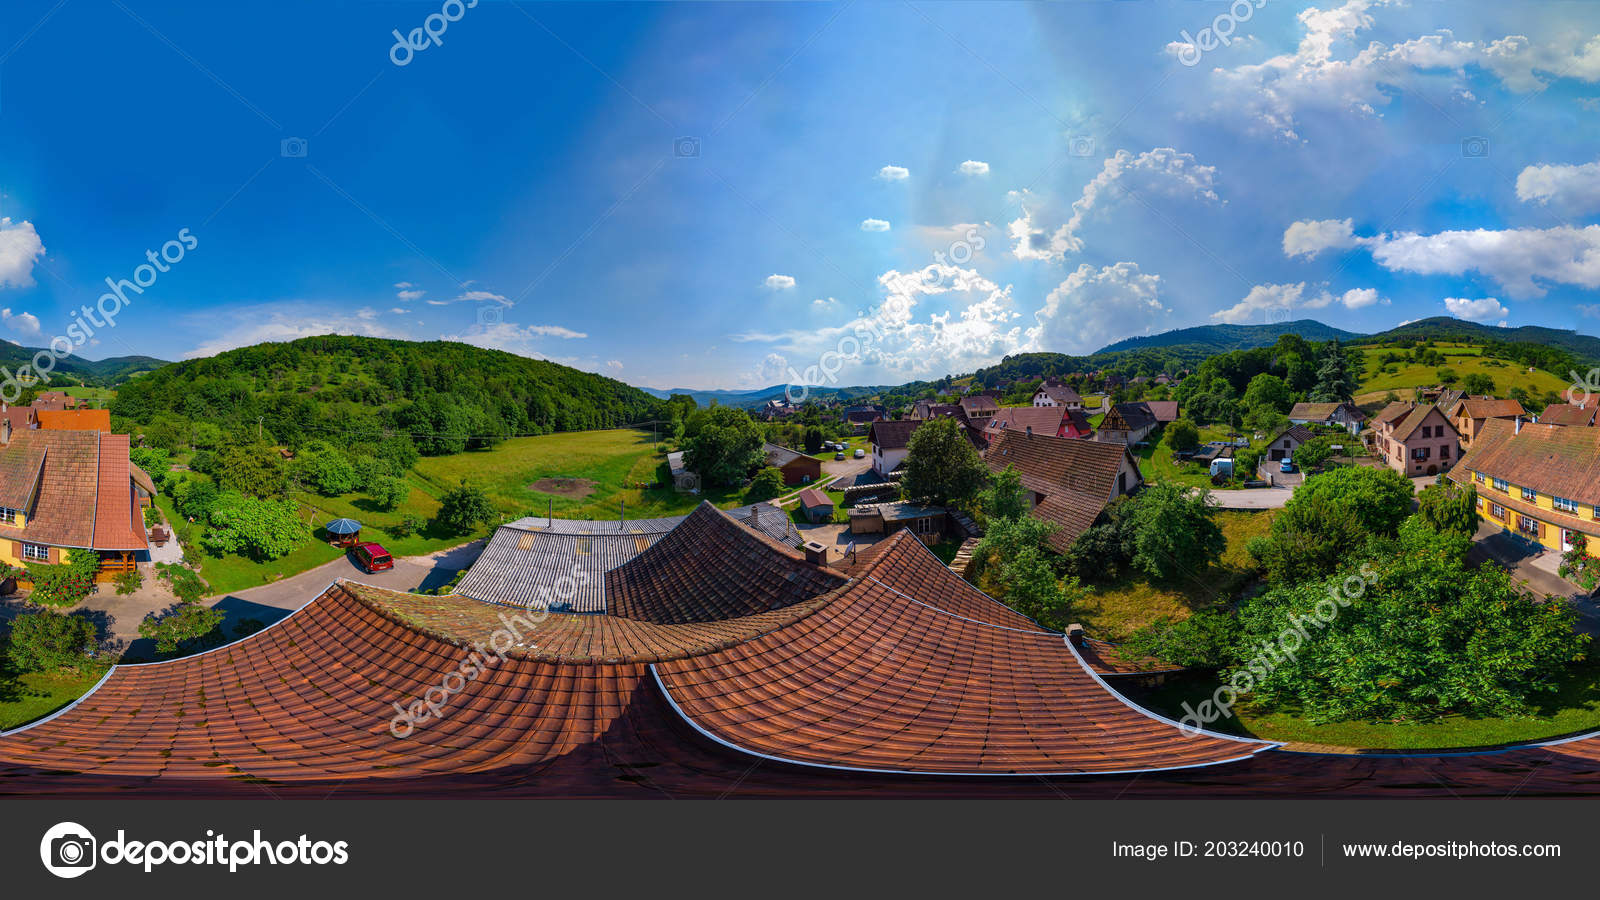 360 degree wallpaper,nature,sky,panorama,natural landscape,roof